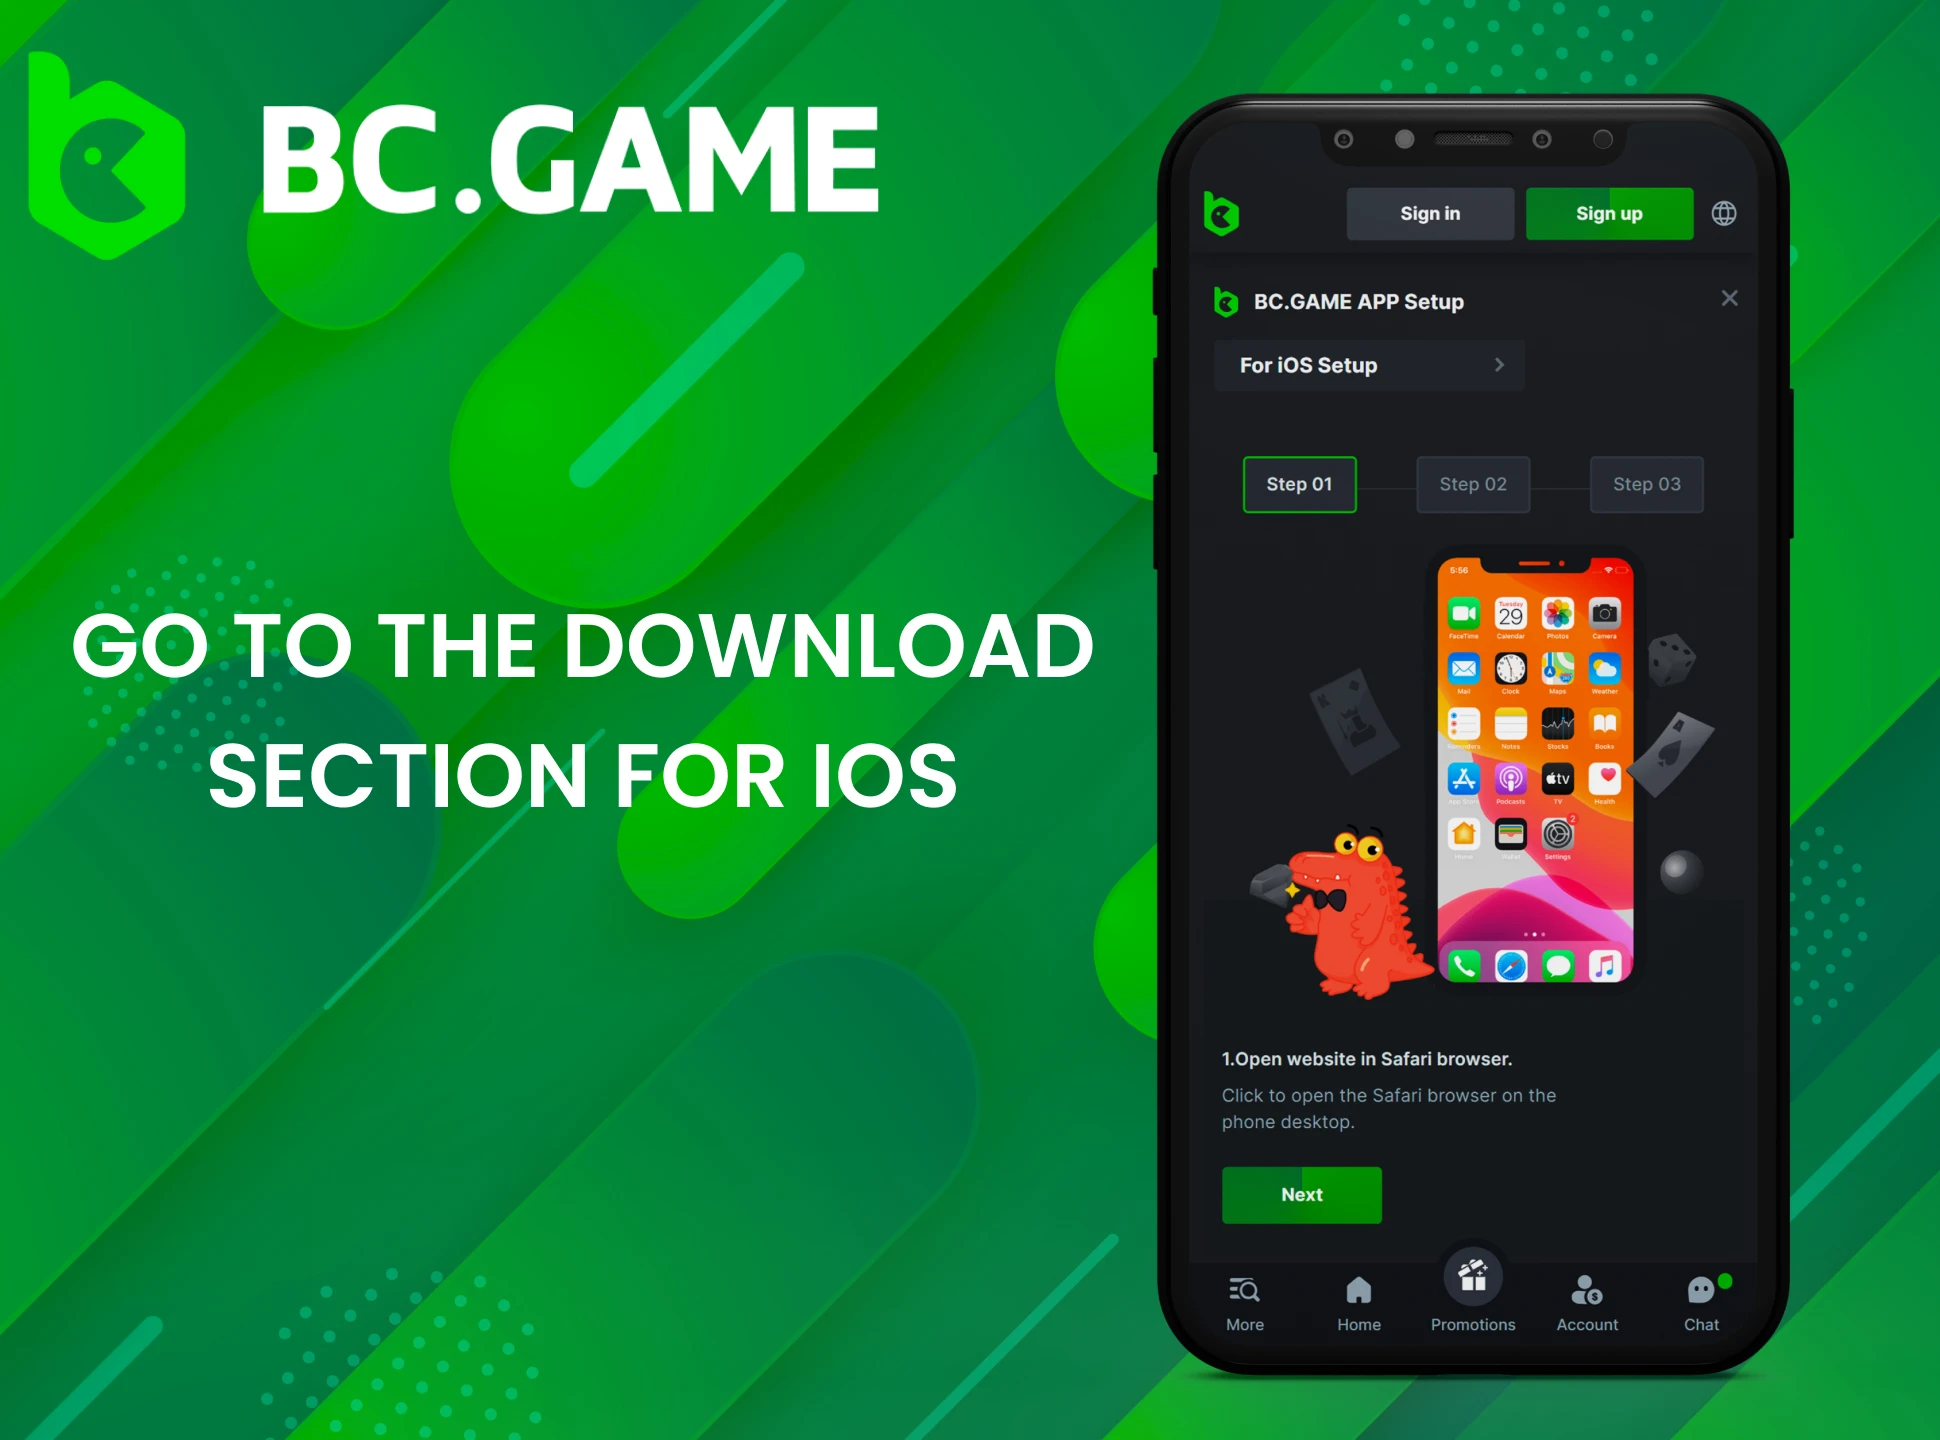 On the BC Game website, go to the app downloads section and select iOS device.